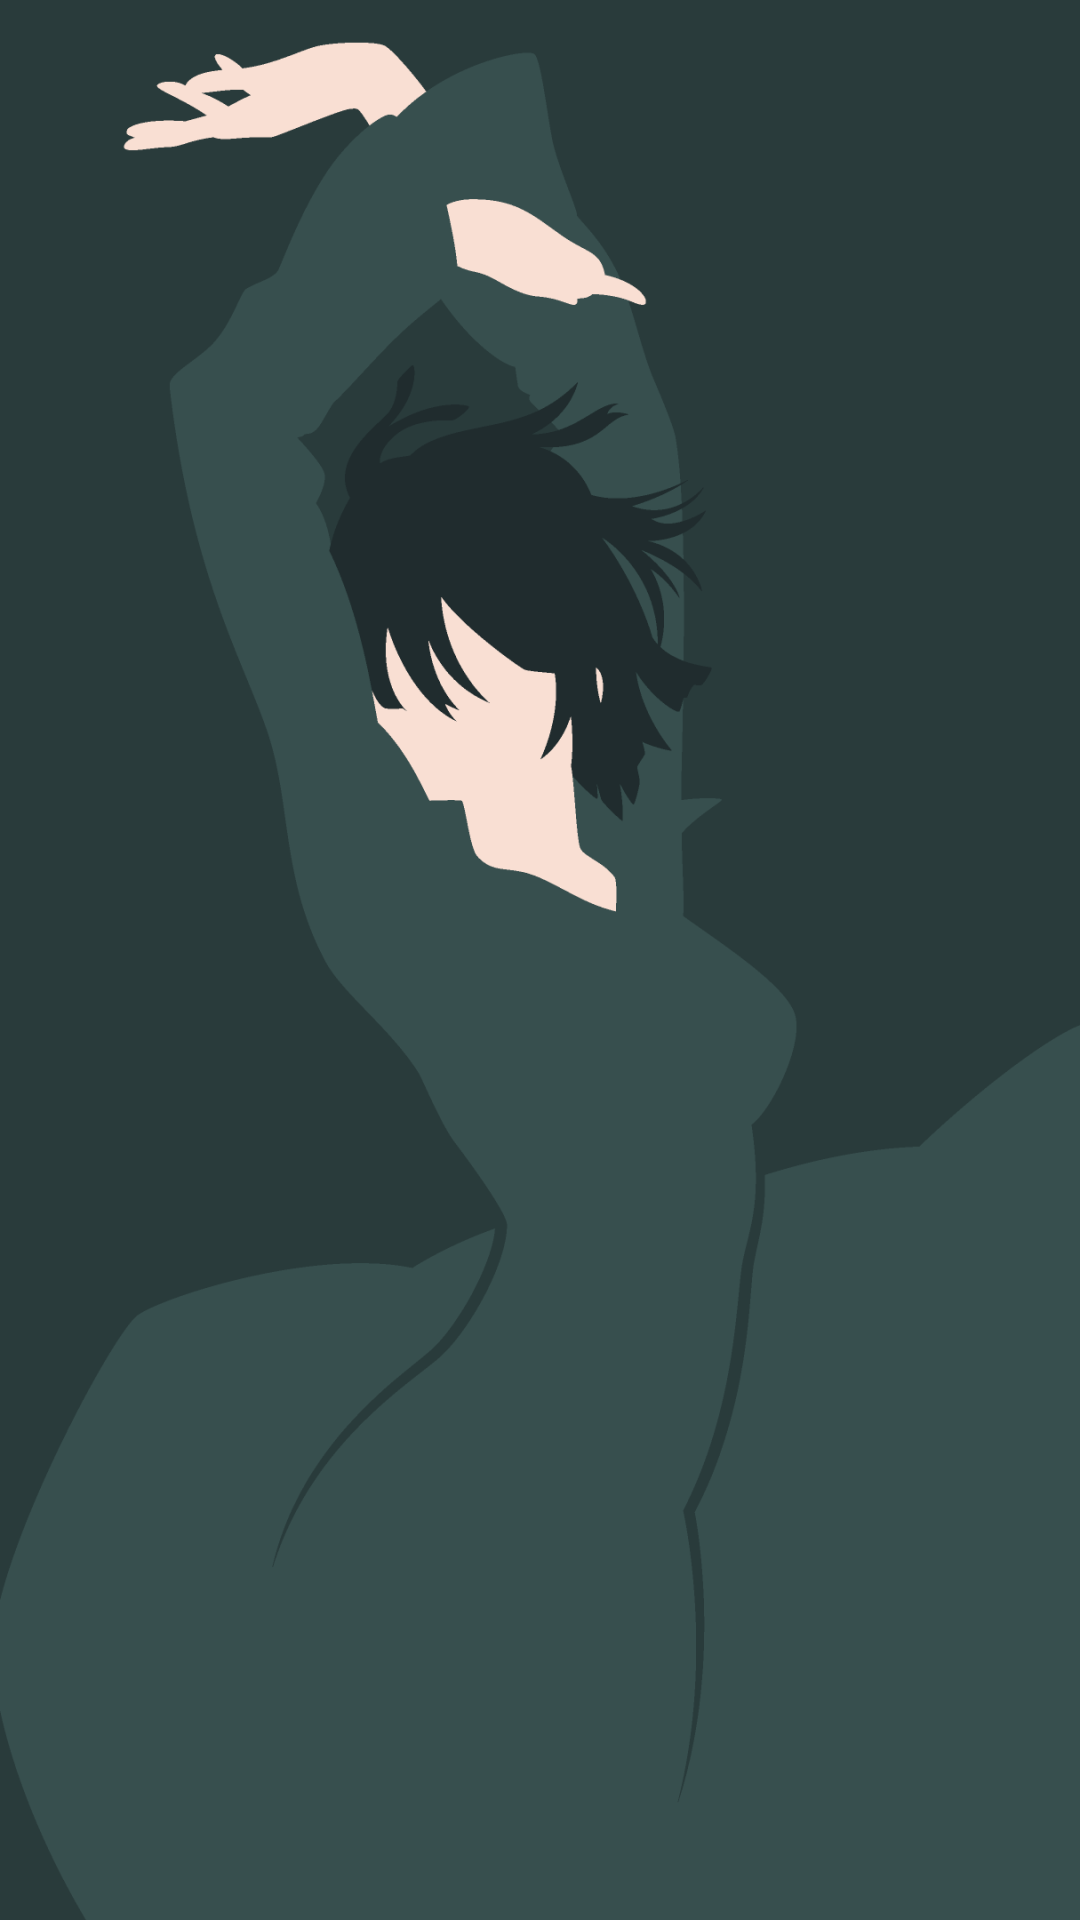 Minimalistic Anime Phone Wallpapers - Wallpaper Cave